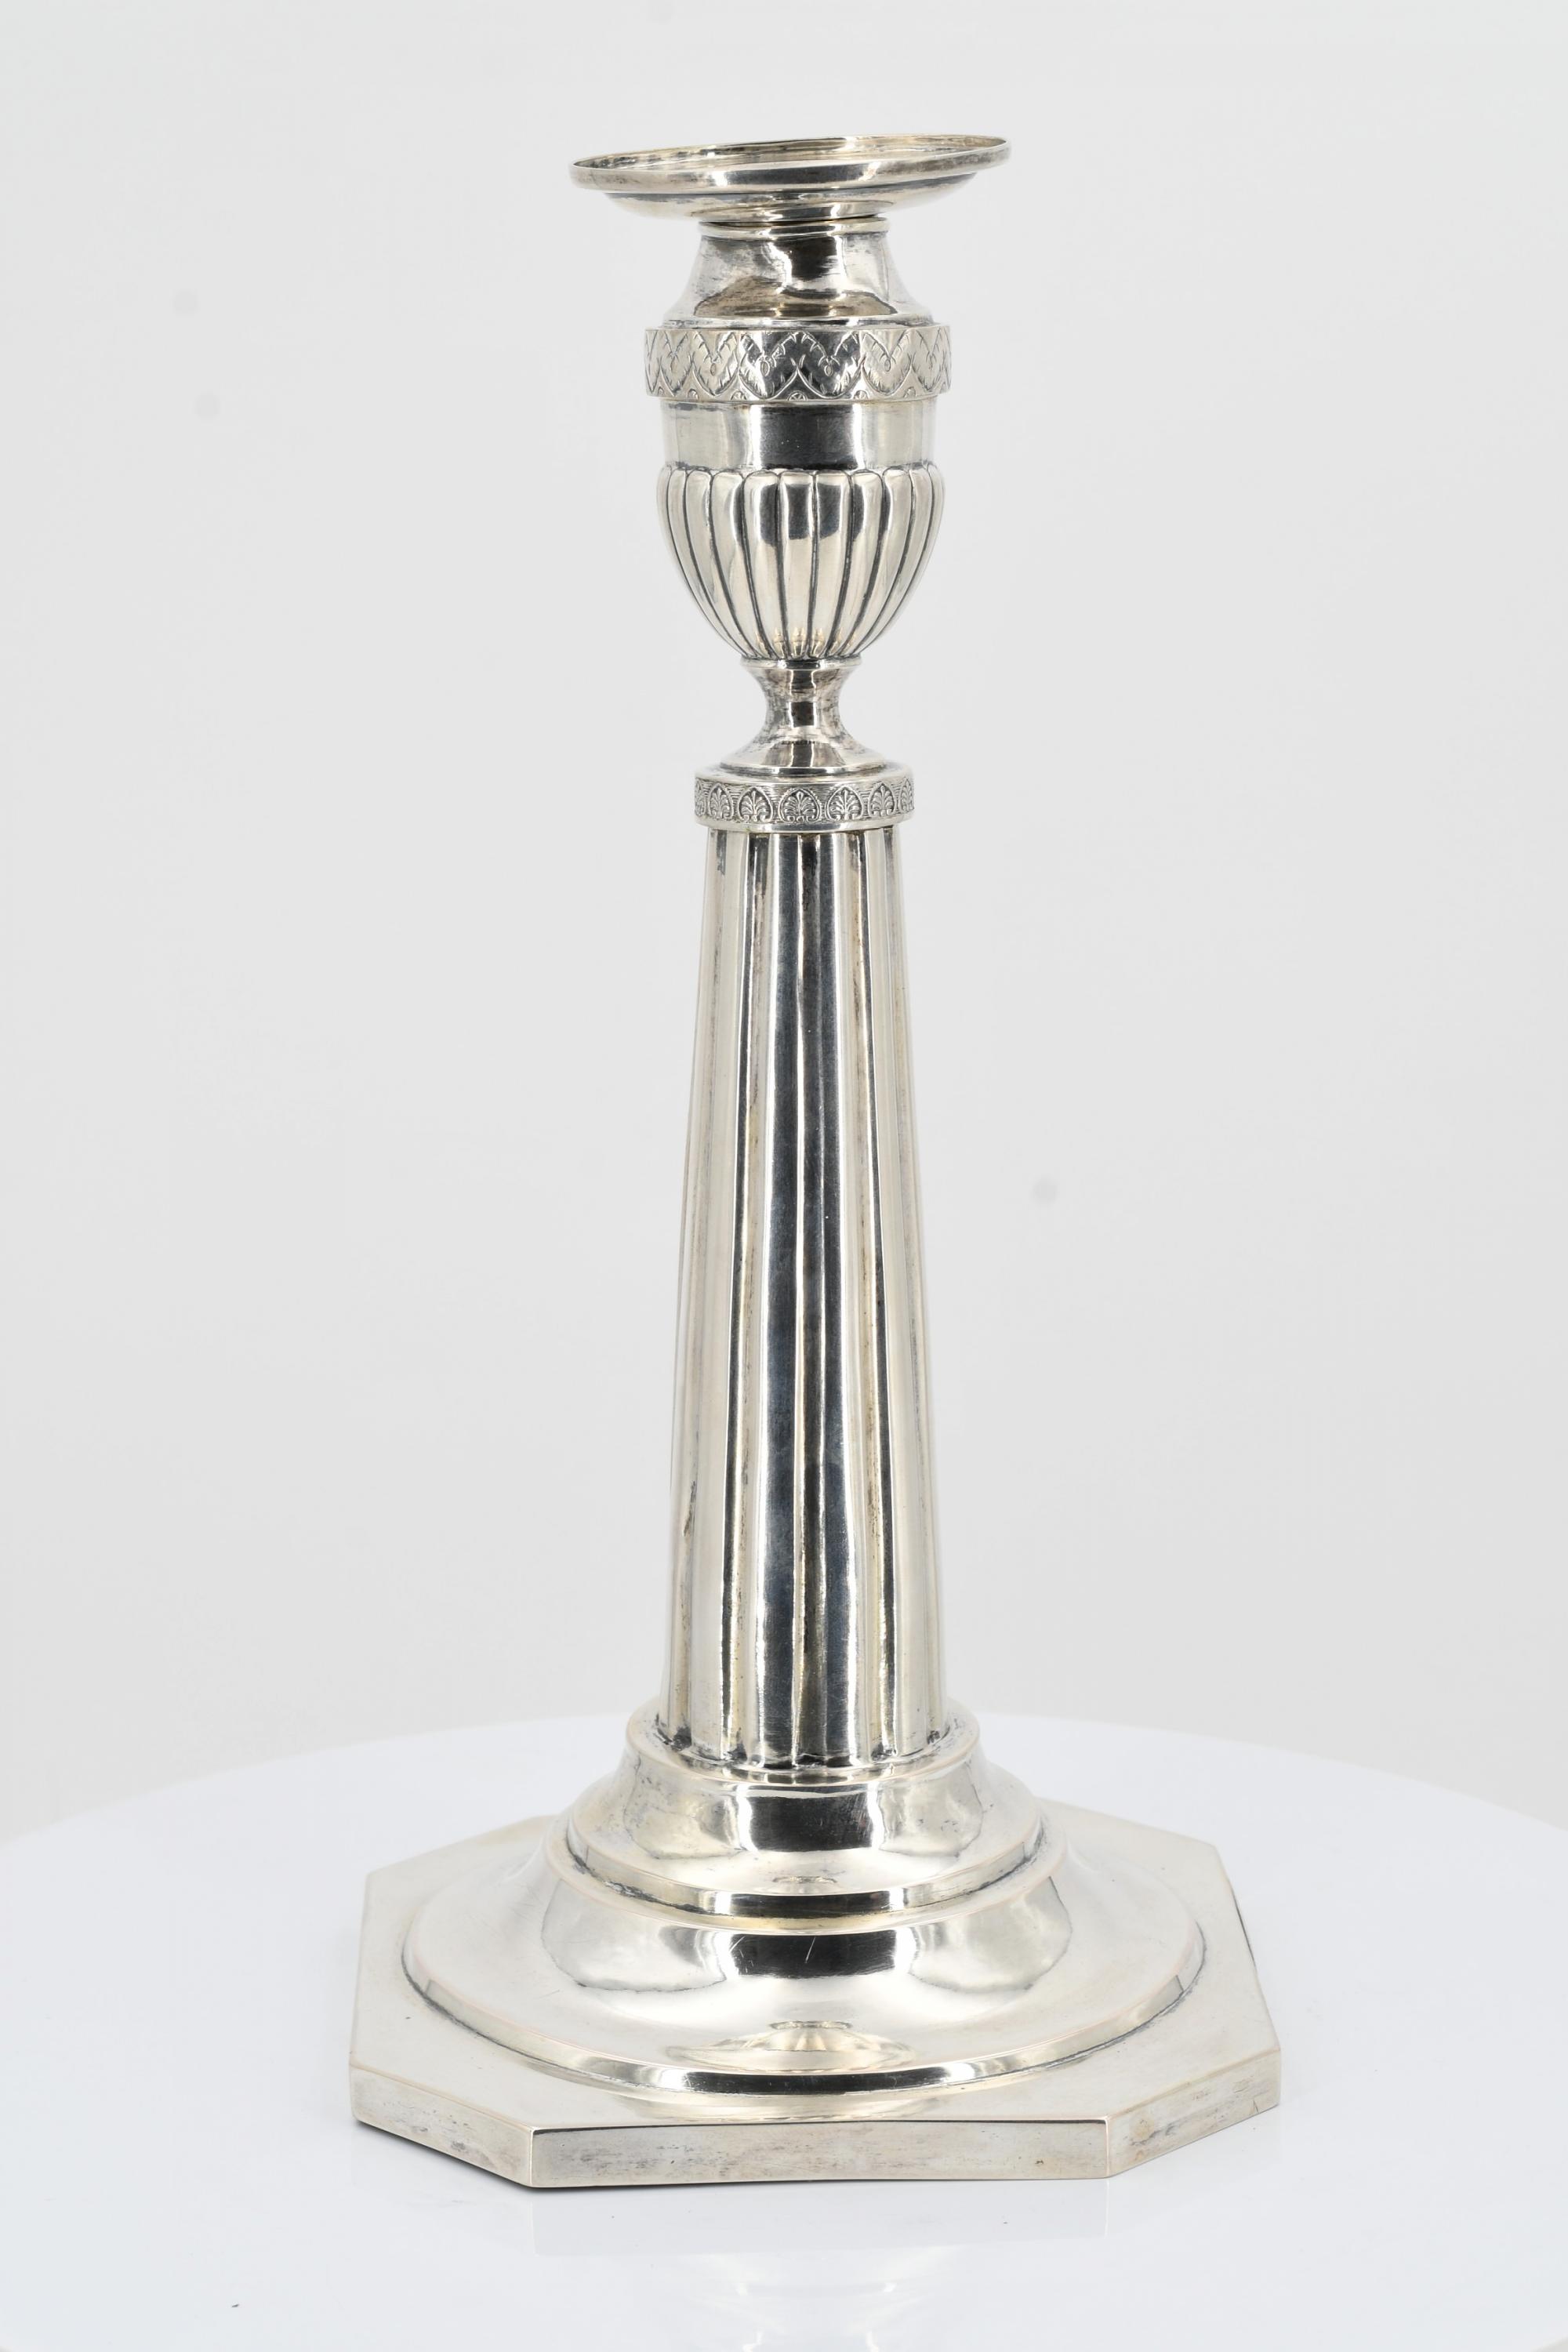 Pair of large candlesticks with fluted shafts - Image 2 of 12